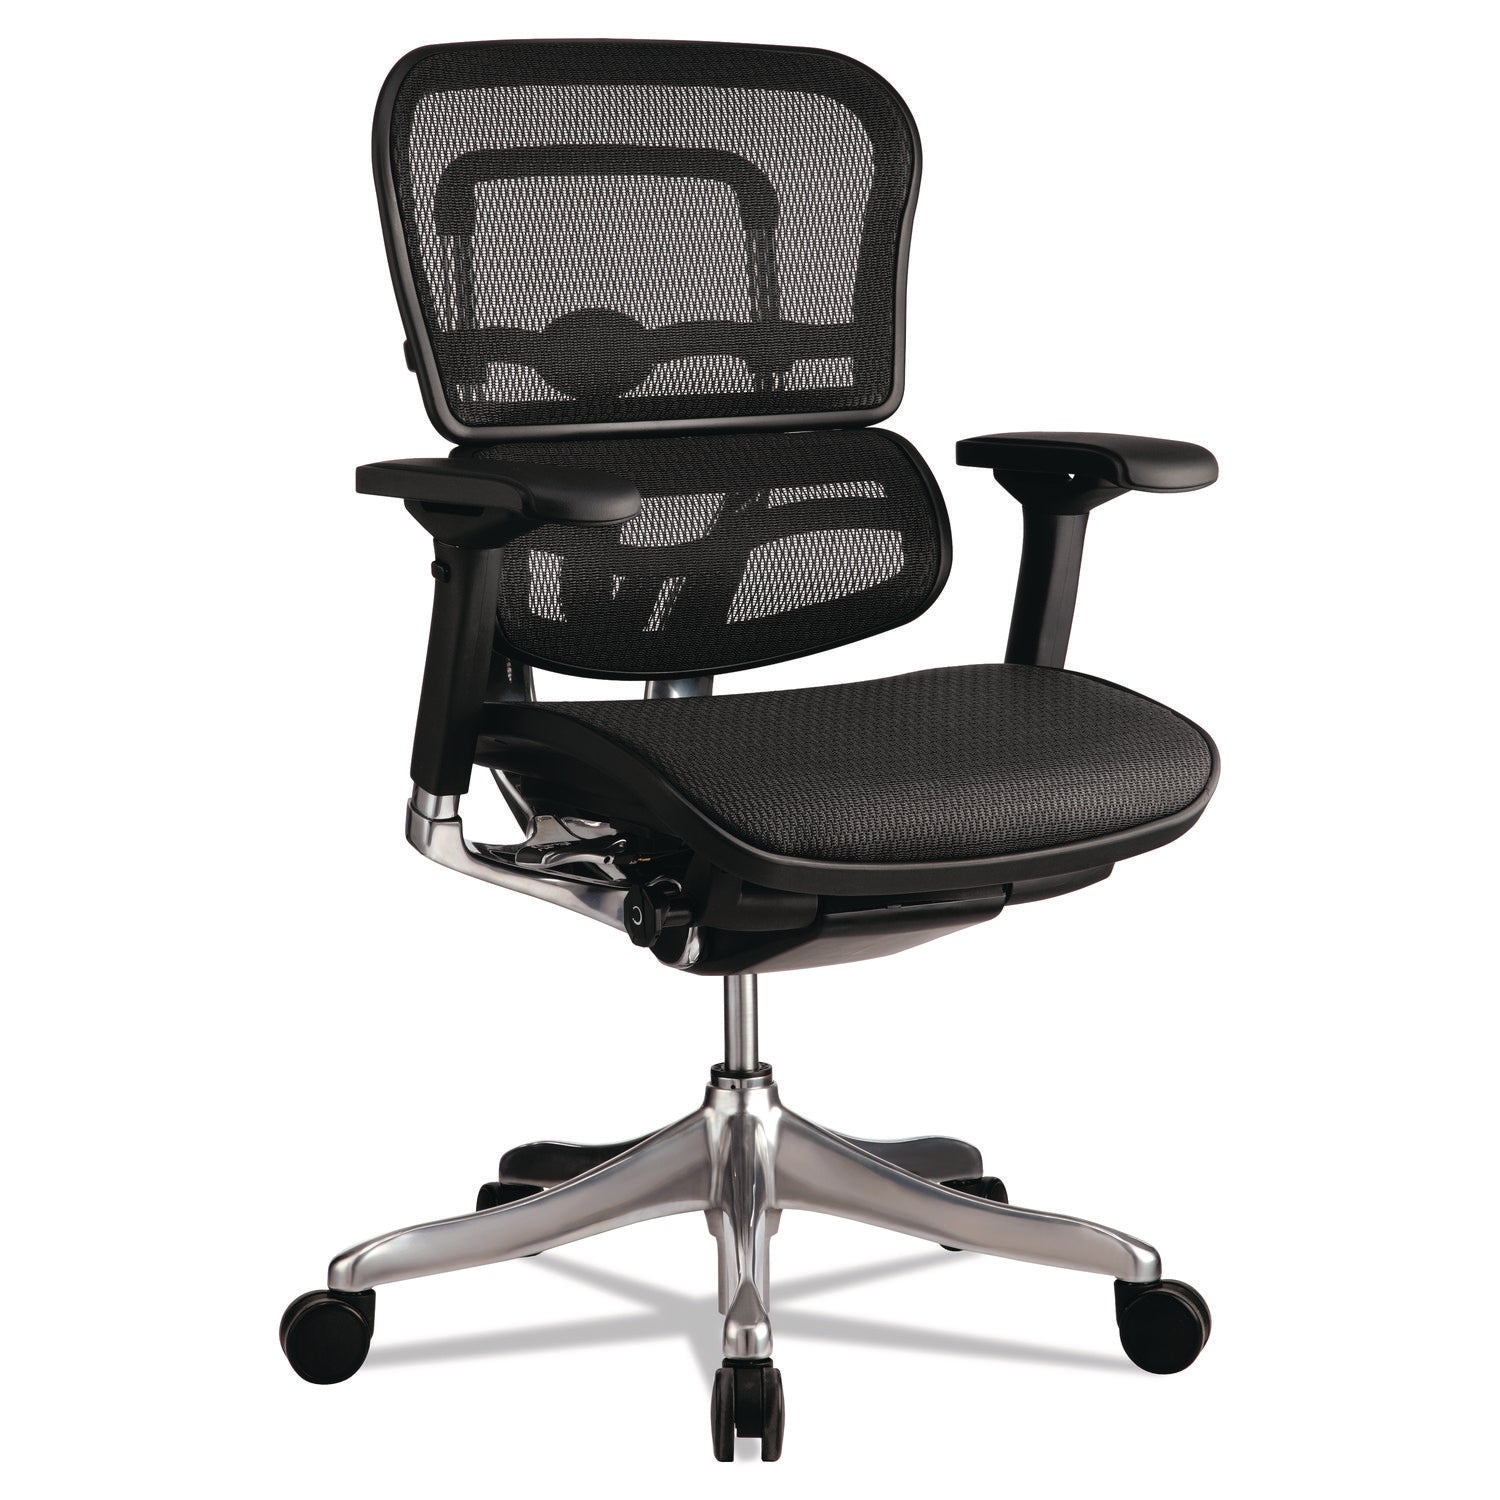 ergohuman-elite-mid-back-mesh-chair-supports-up-to-250-lb-1811-to-2165-seat-height-black_eutme5ergltn15 - 1